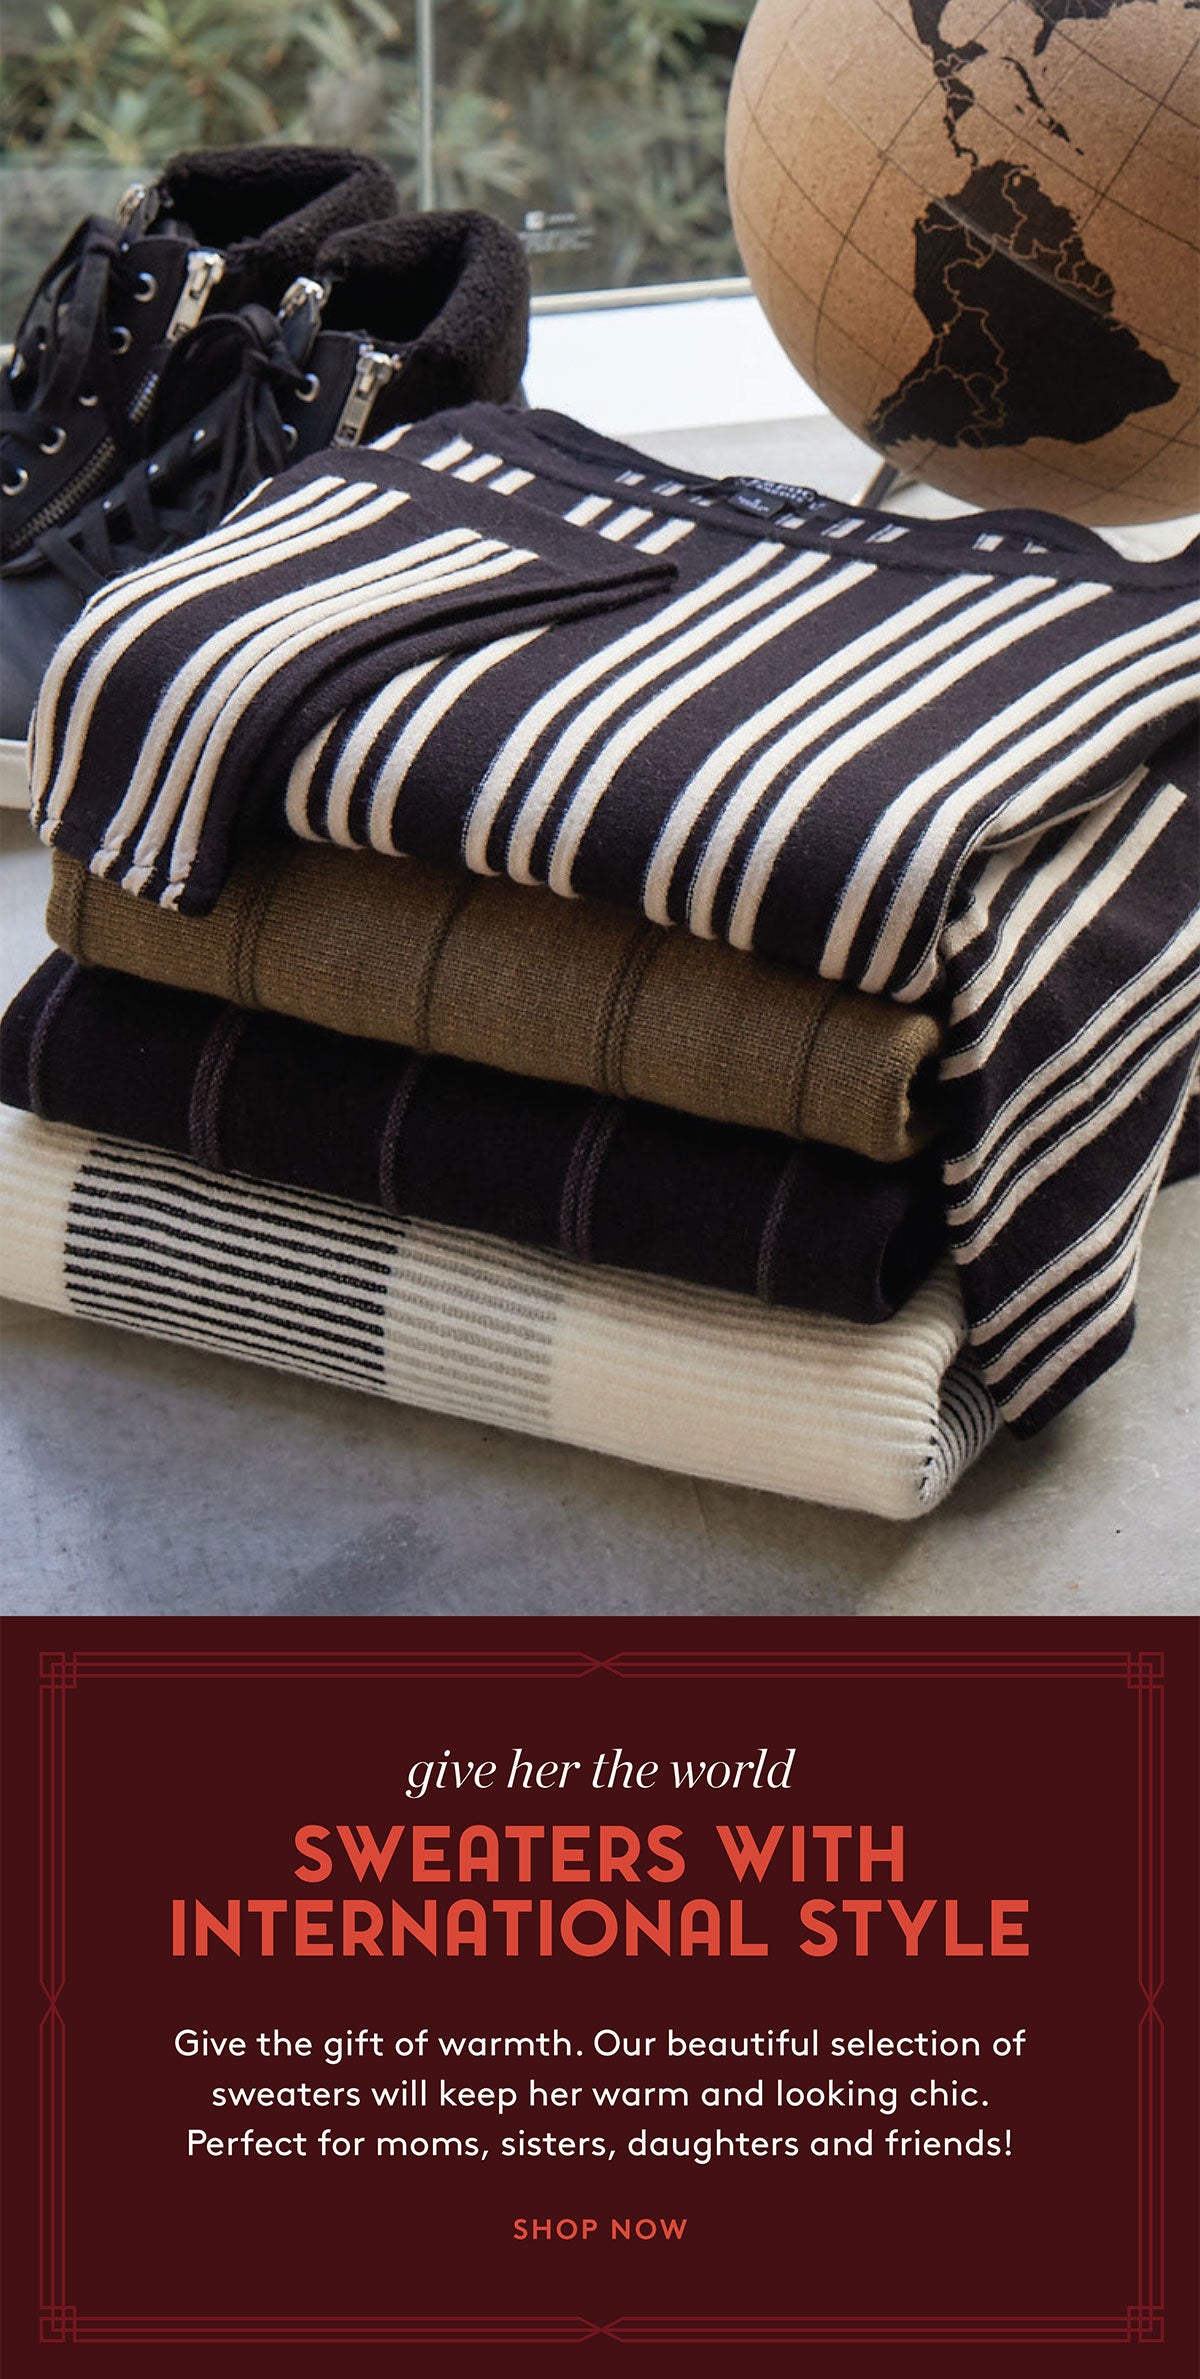 Give Her The World: SWEATERS WITH INTERNATIONAL STYLE- Give the gift of warmth. Our beautiful selection of sweaters will keep her warm and looking chic. Perfect for moms, sisters, daughters and friends! SHOP NOW